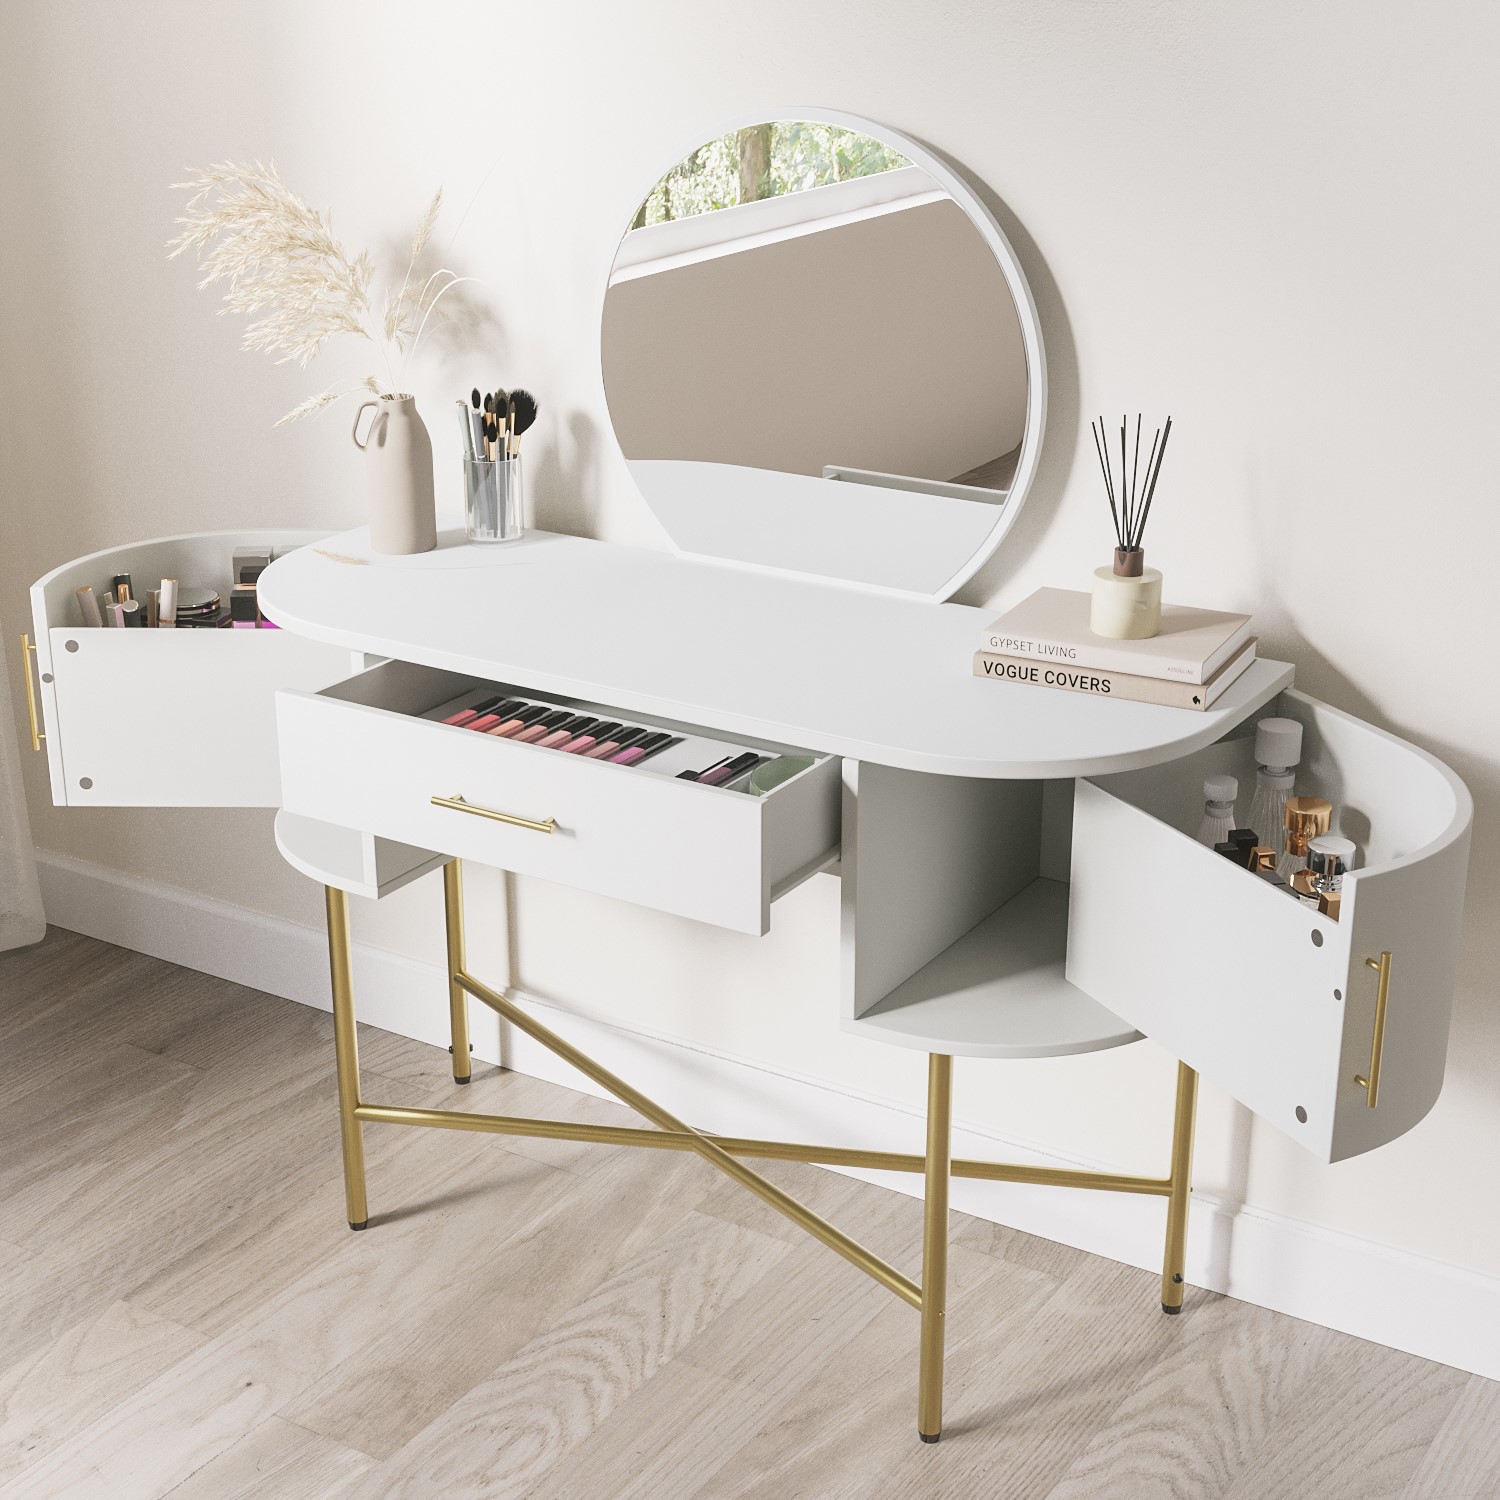 Read more about White marble top dressing table with mirror and storage drawers gigi